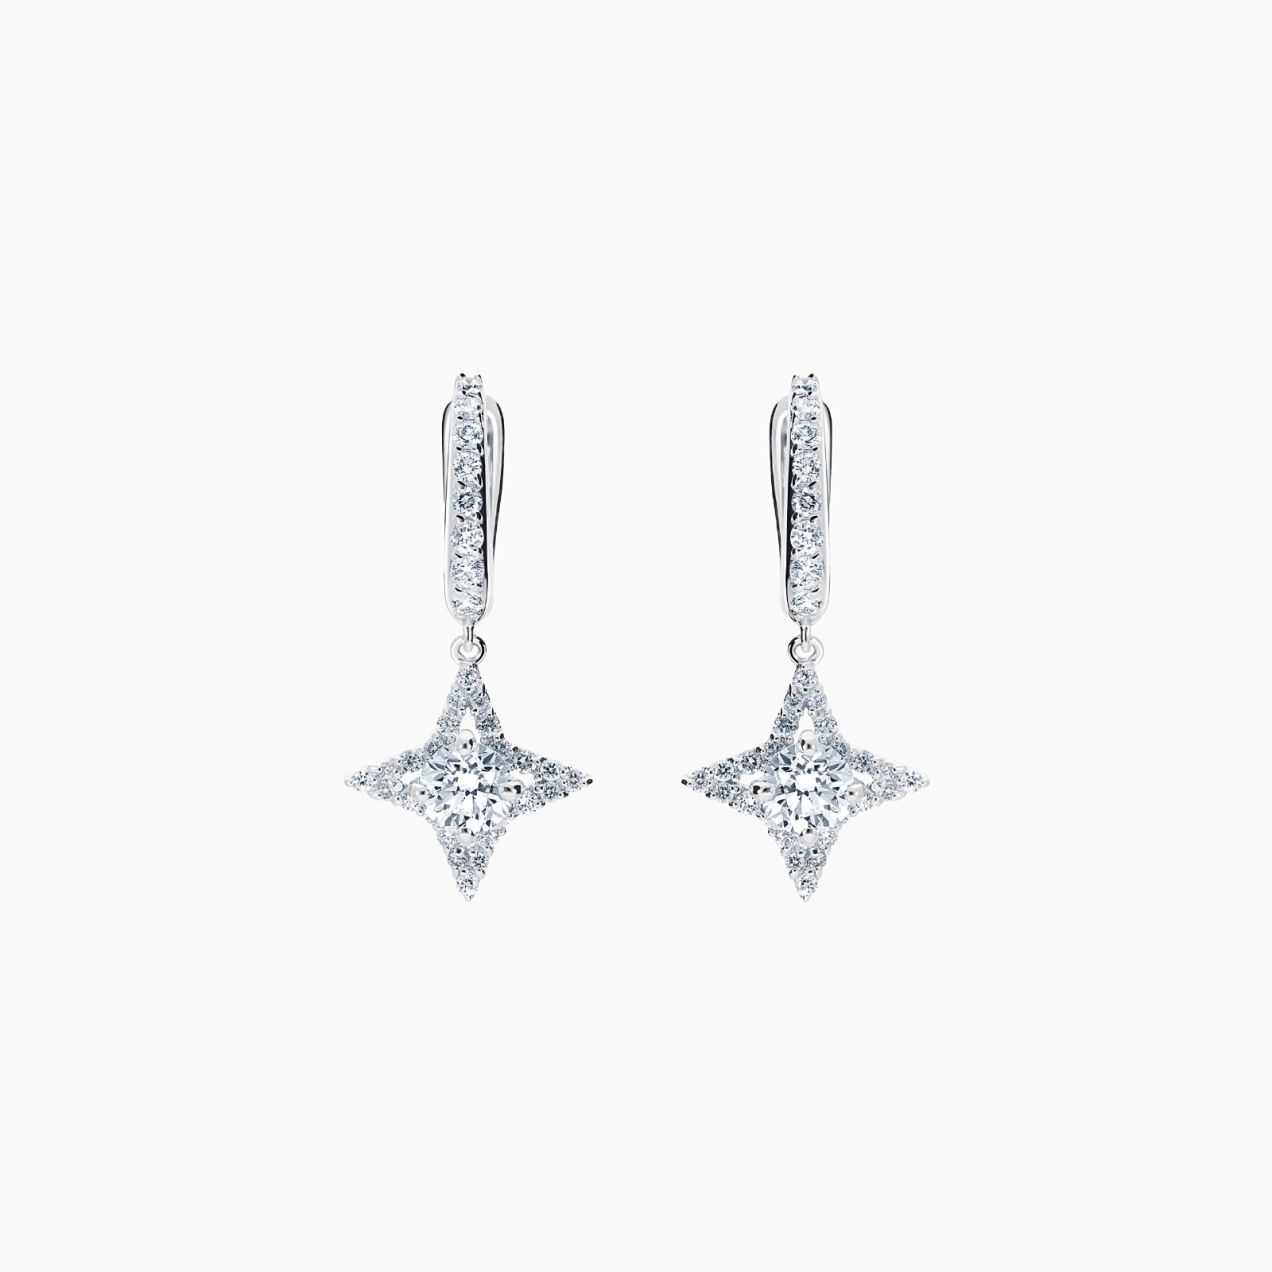 Star earrings in white gold with central diamond and diamond halo